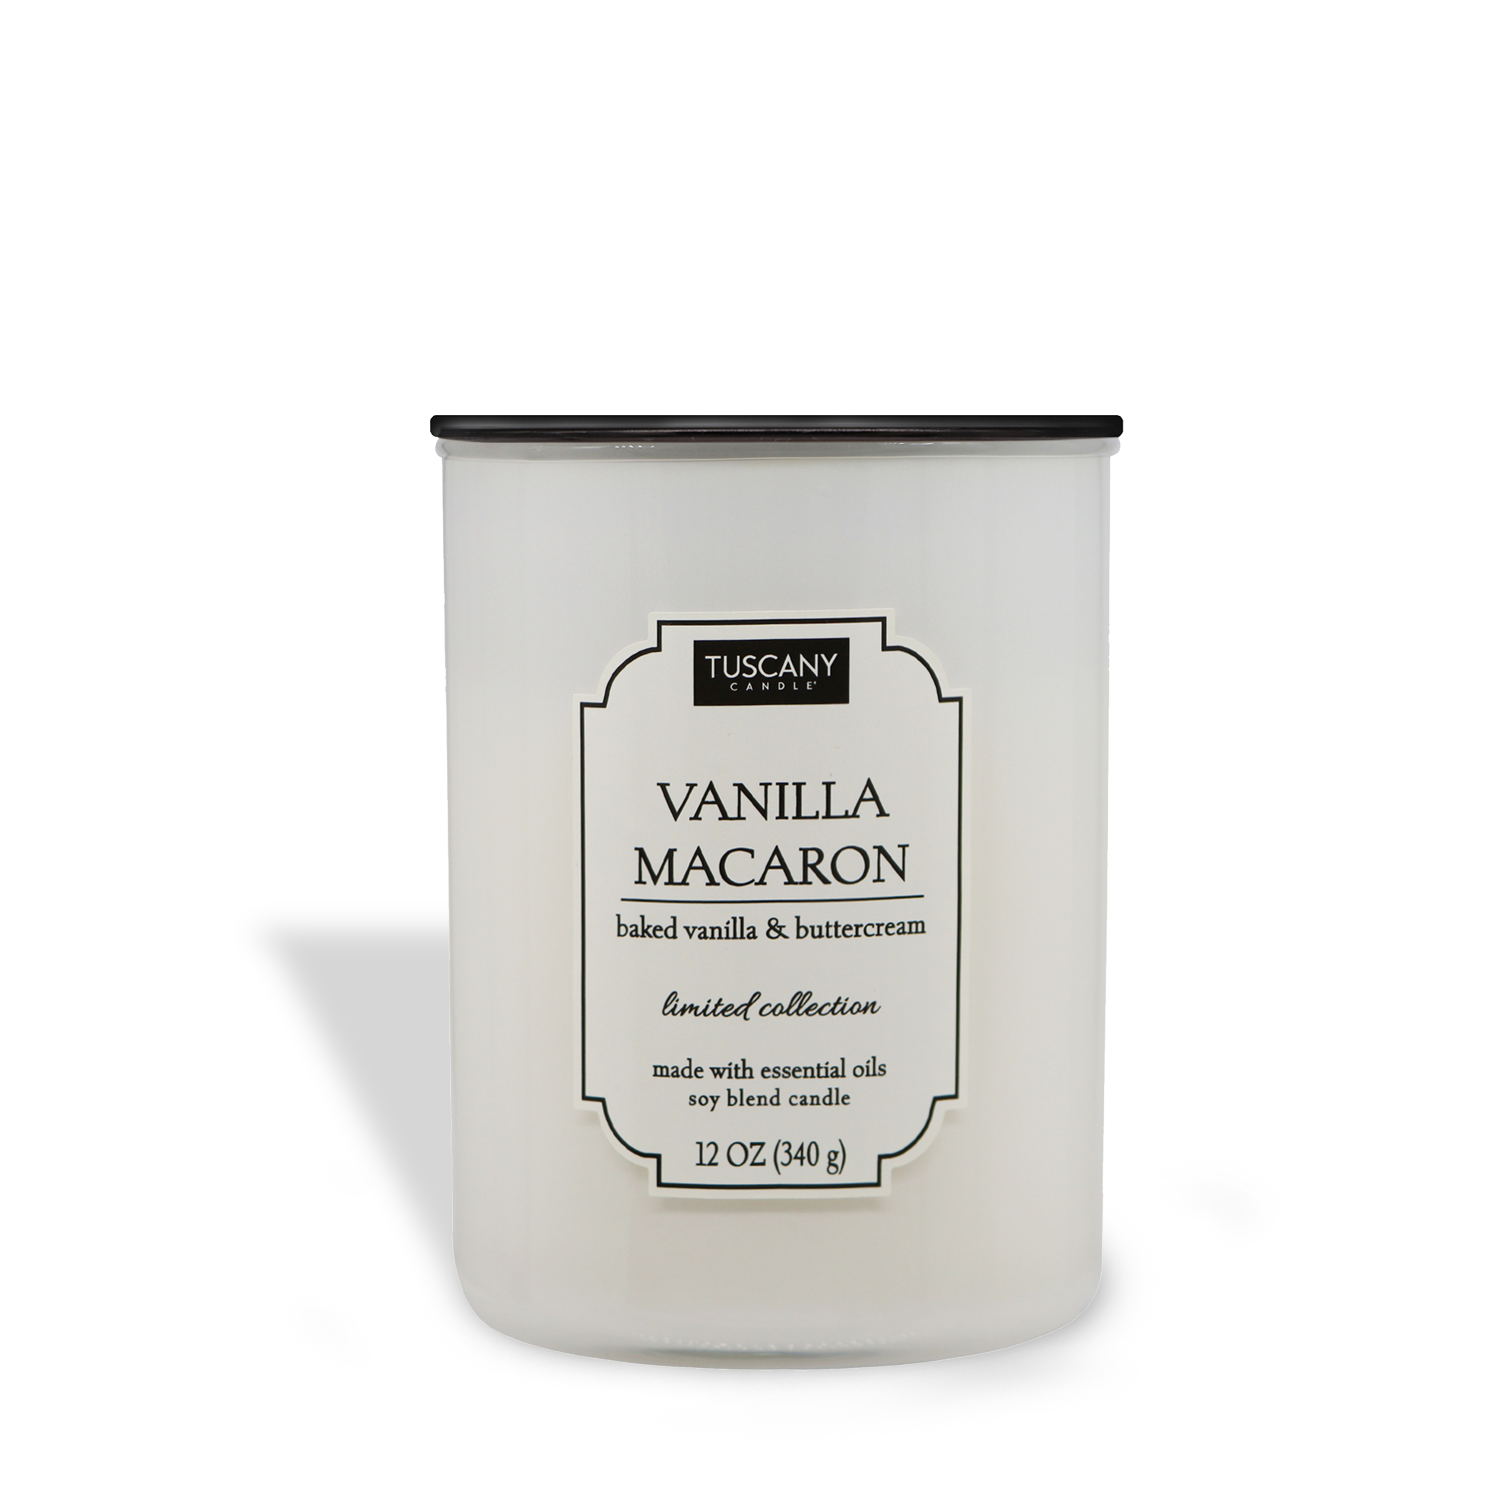 A scented candle labeled "Vanilla Macaron (12 oz) – Colorsplash Collection" in a white jar with a black lid, part of the Tuscany Candle® EVD collection.